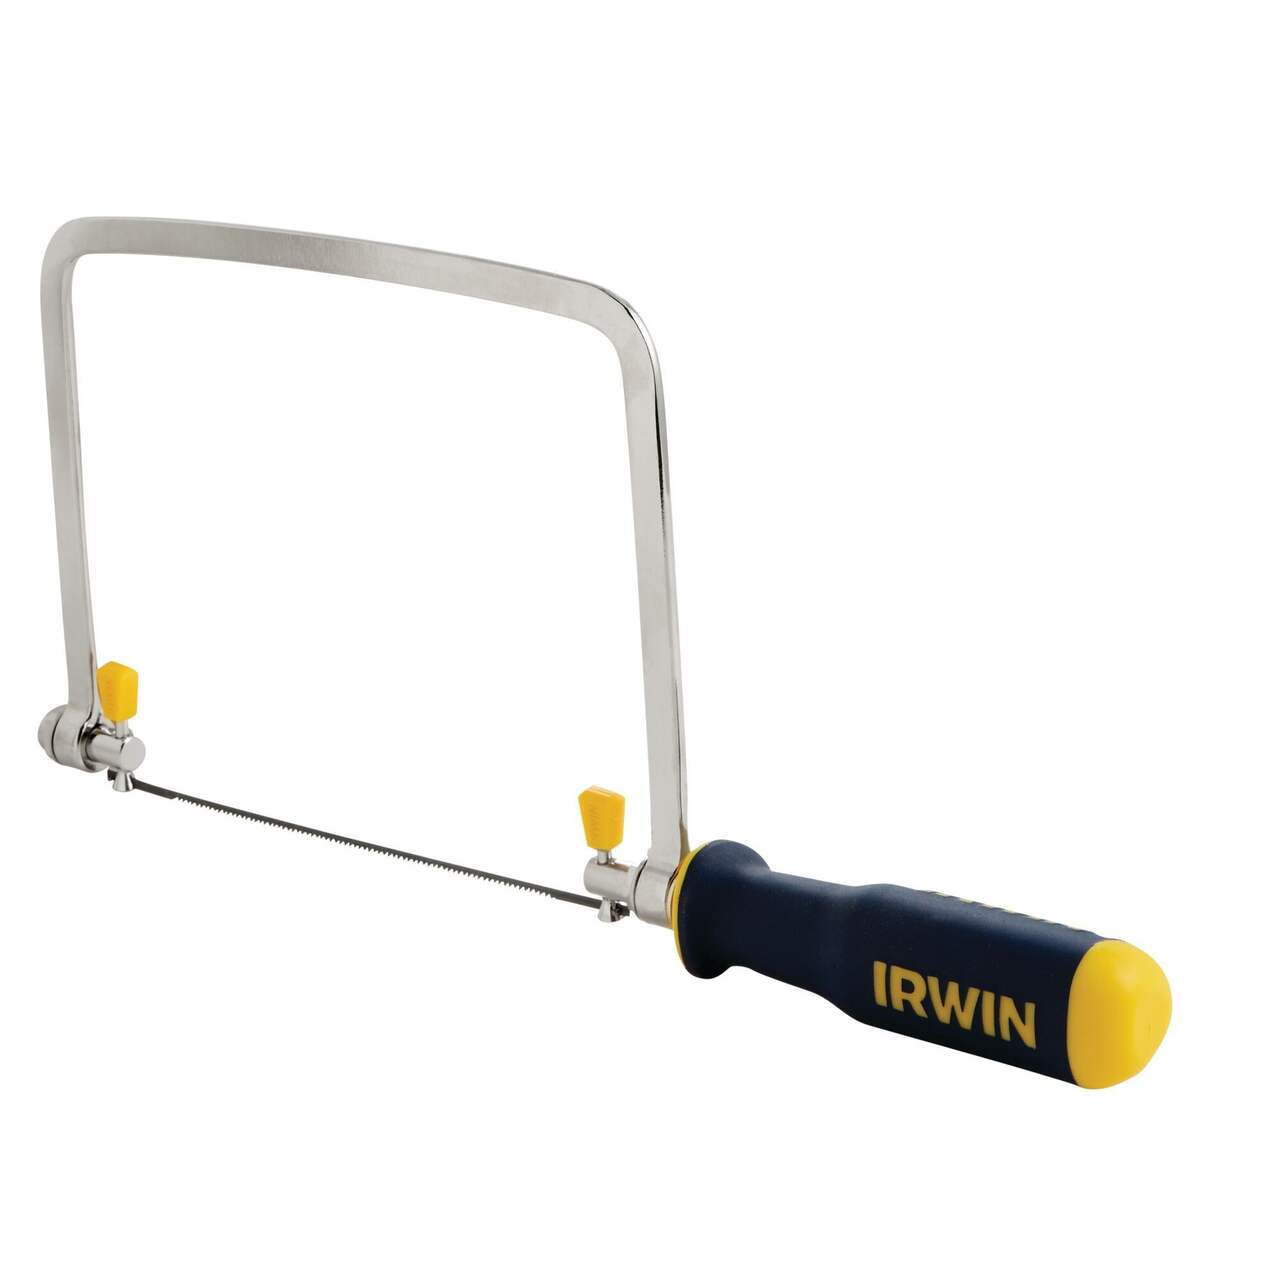 IRWIN Marples 6.5-in Fine Finish Cut Coping Saw in the Hand Saws